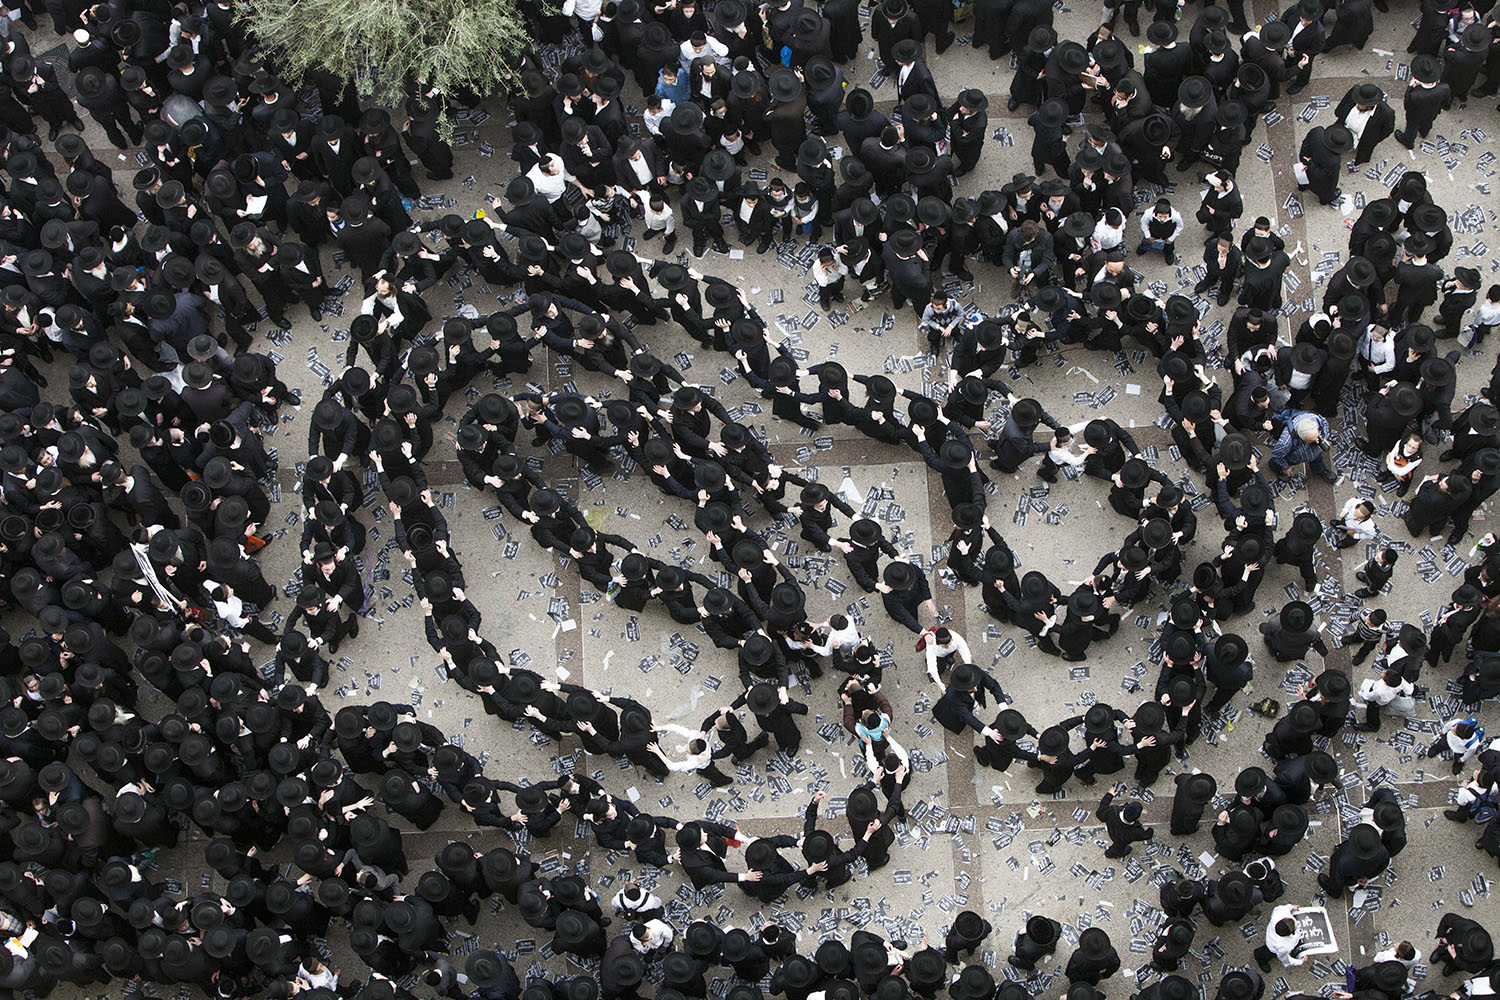 Mar. 2, 2014. A massive crowd of Ultra Orthodox Jews gathered in Jerusalem to pray and protest against a consolidating bill that will order the enlistment of members of its community to the Israel Defense Forces.